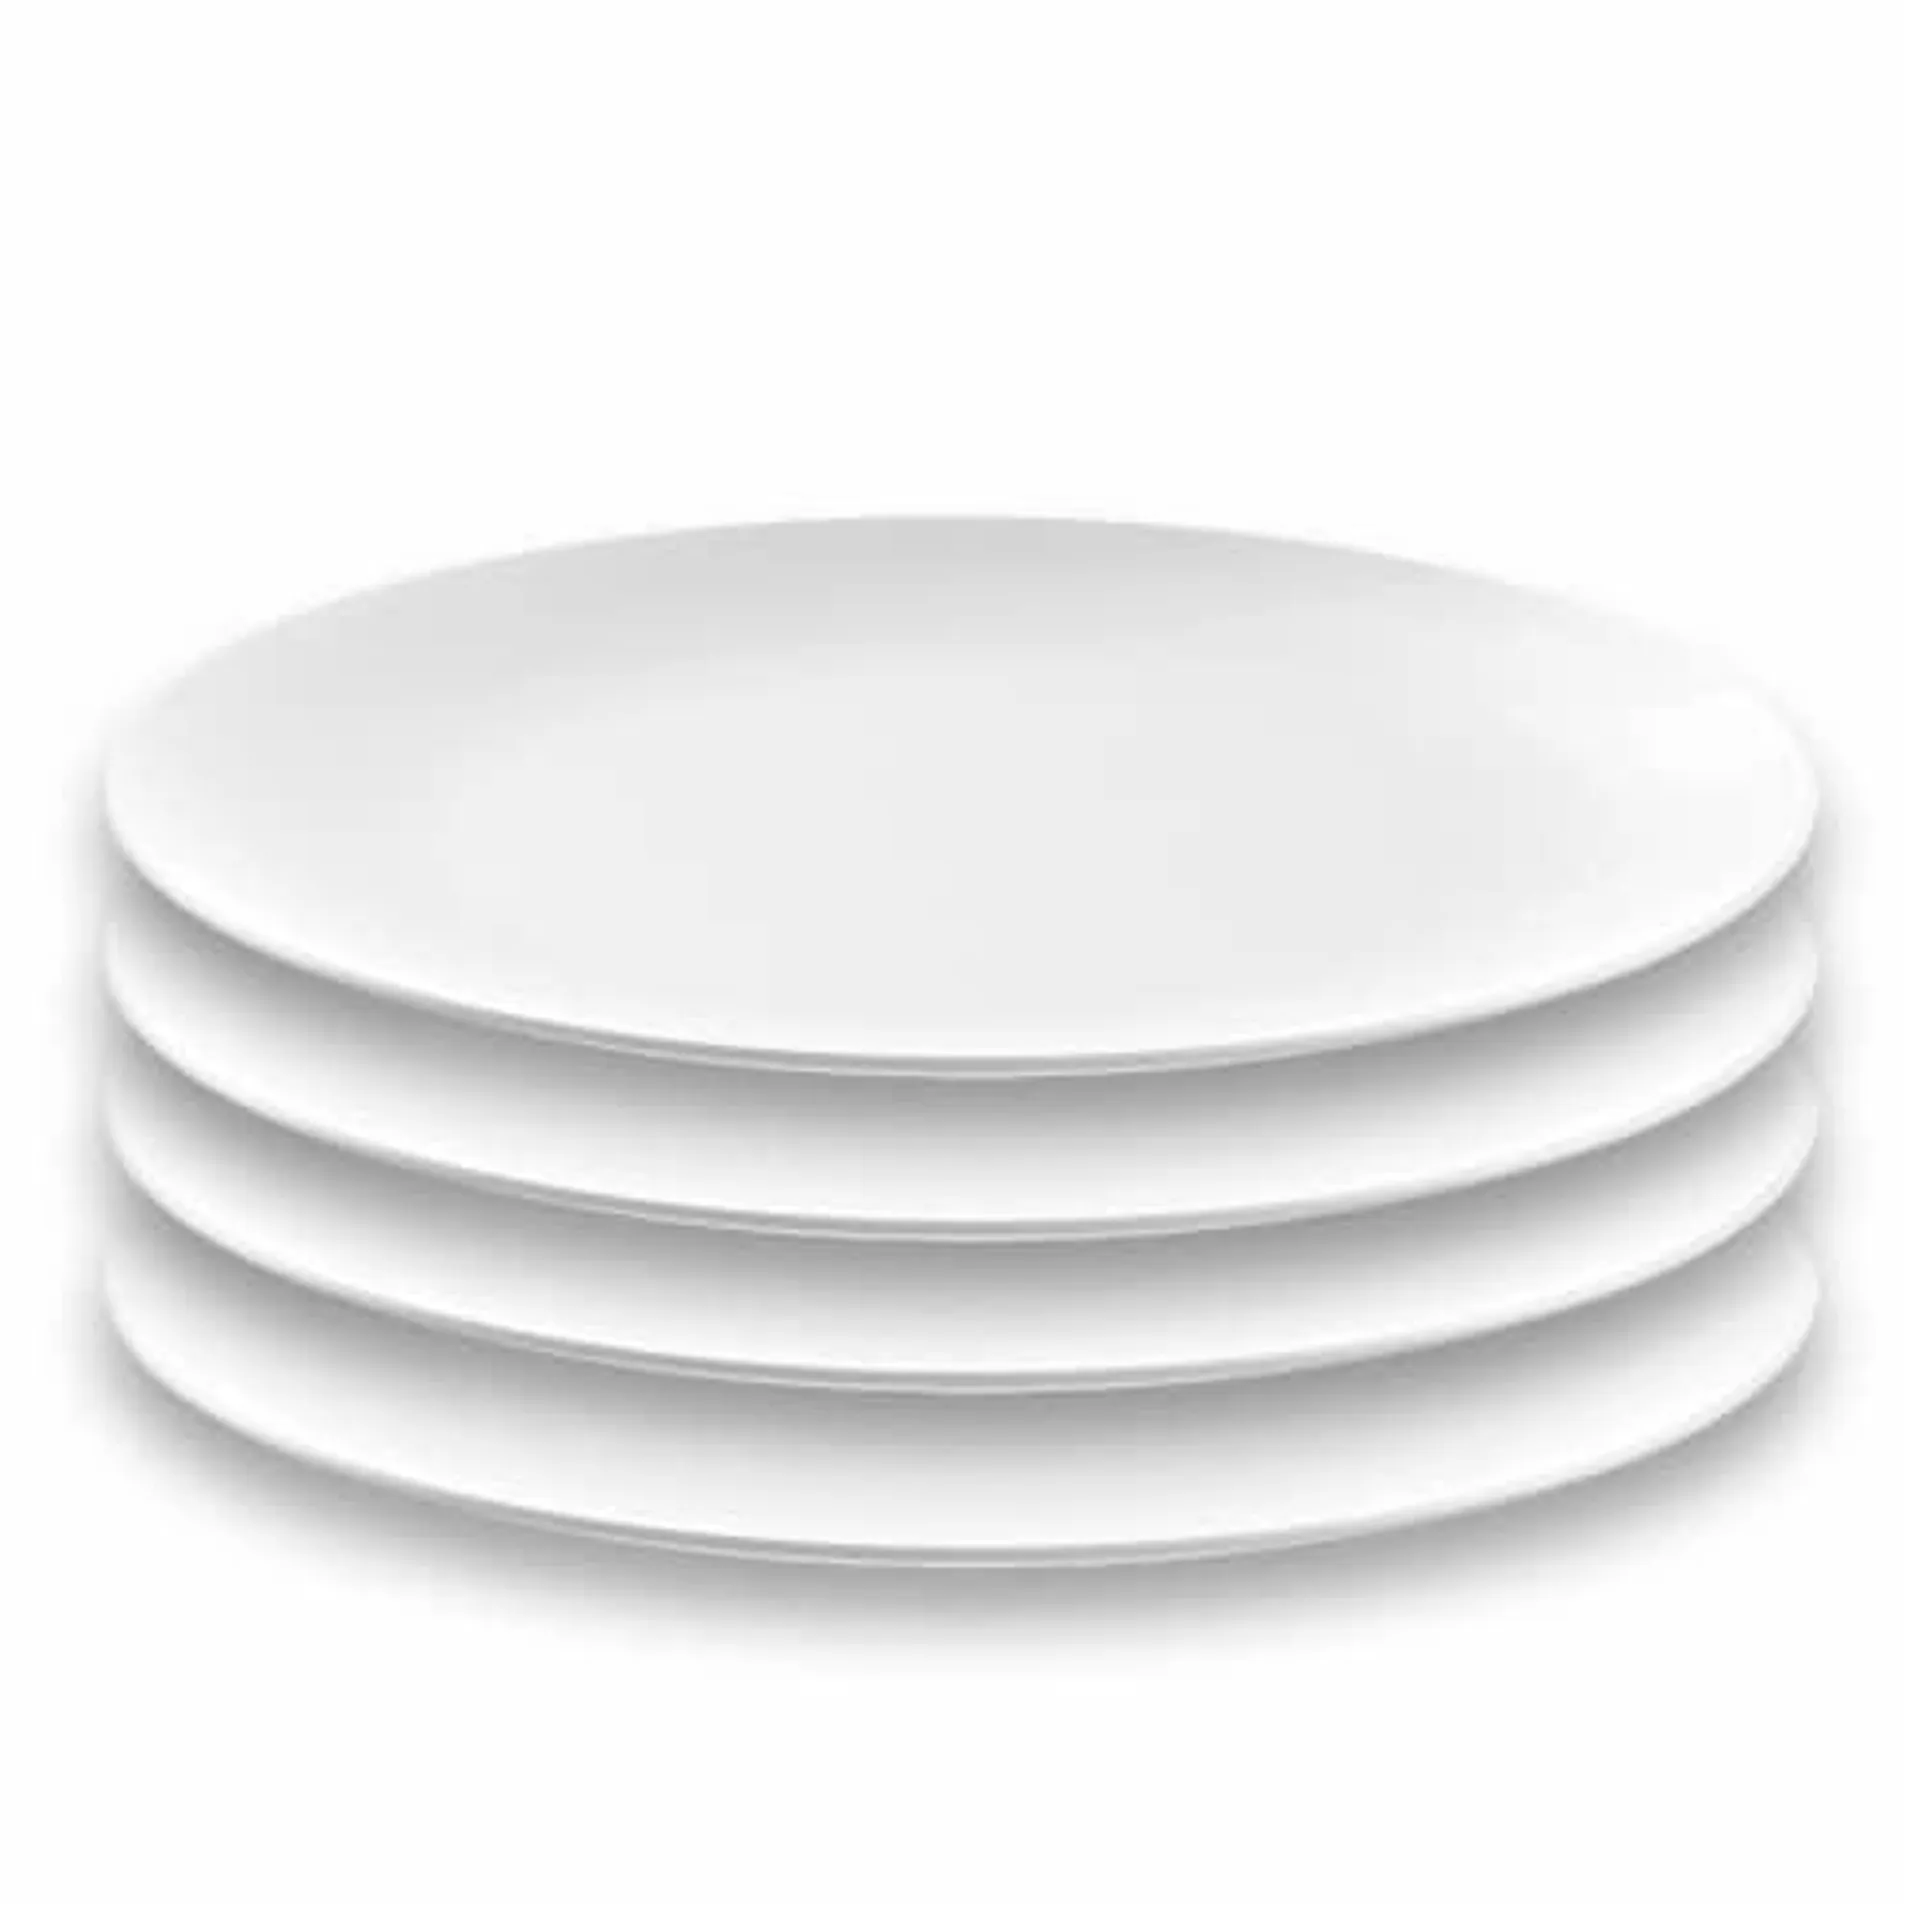 HD Designs Outdoors Dinner Plates - White